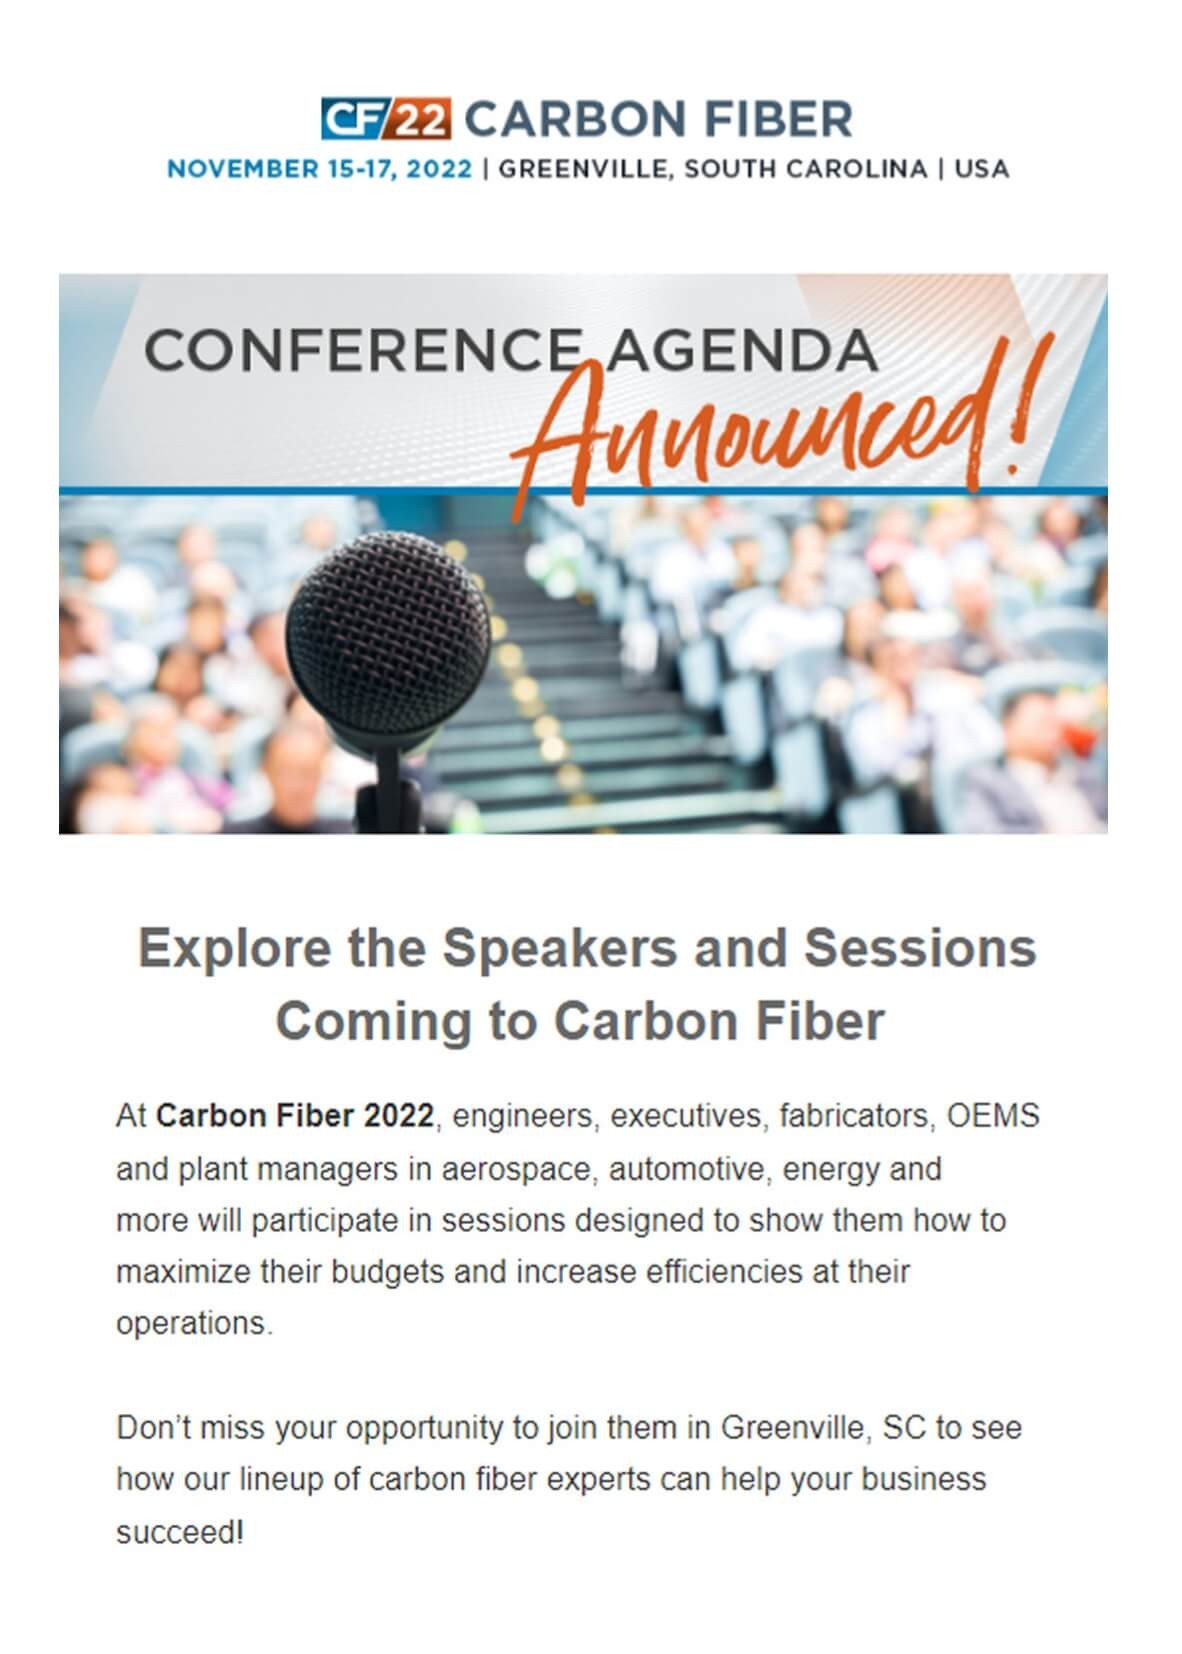 Explore the Speakers and Sessions Coming to Carbon Fiber